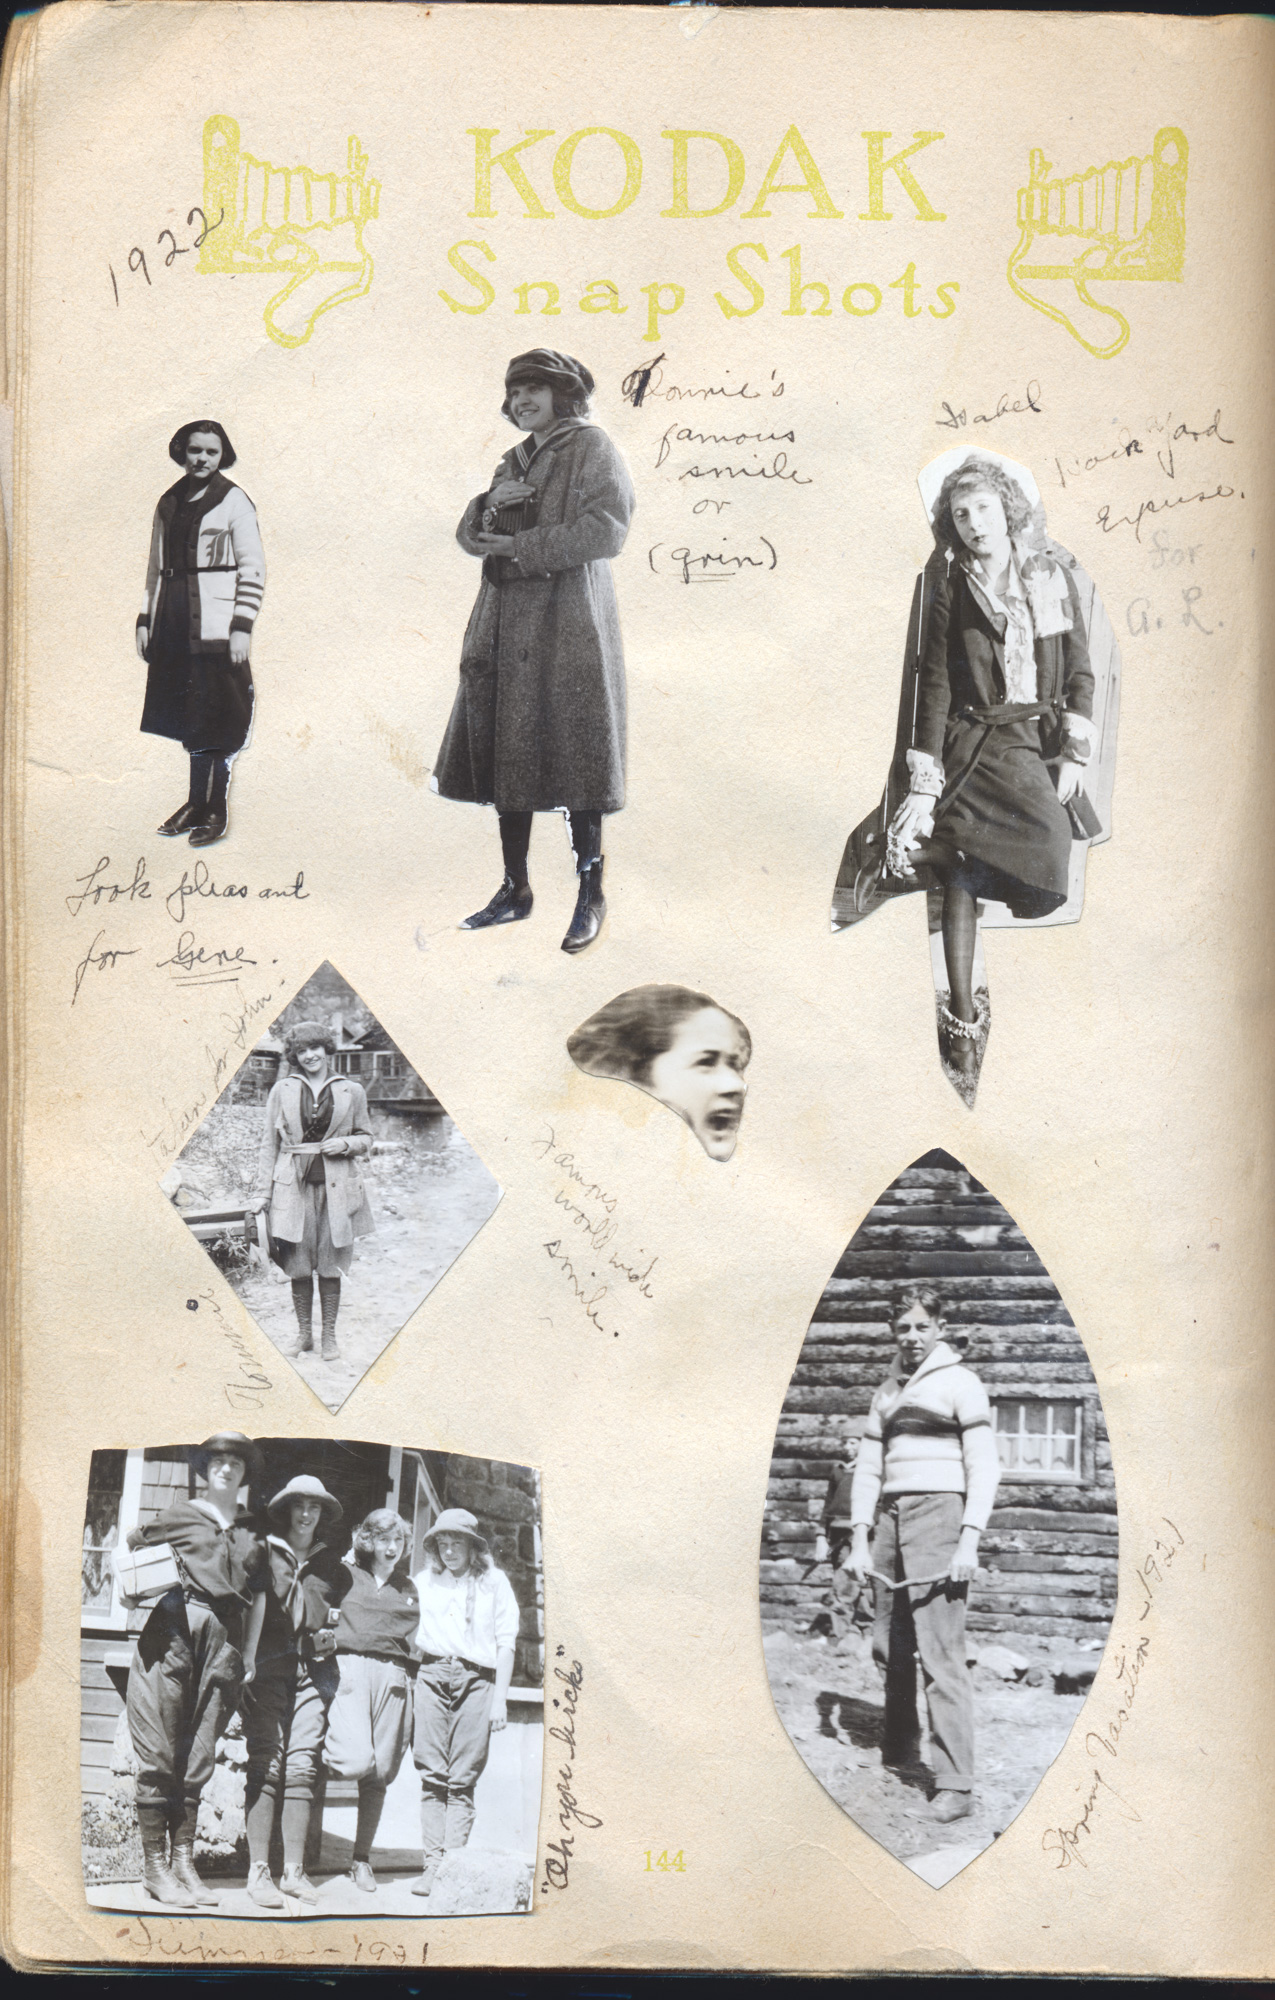 Dauth Family Archive - Circa 1920-1924 - Elizabeth Dauth's Memory Book - Page 144 - Photo